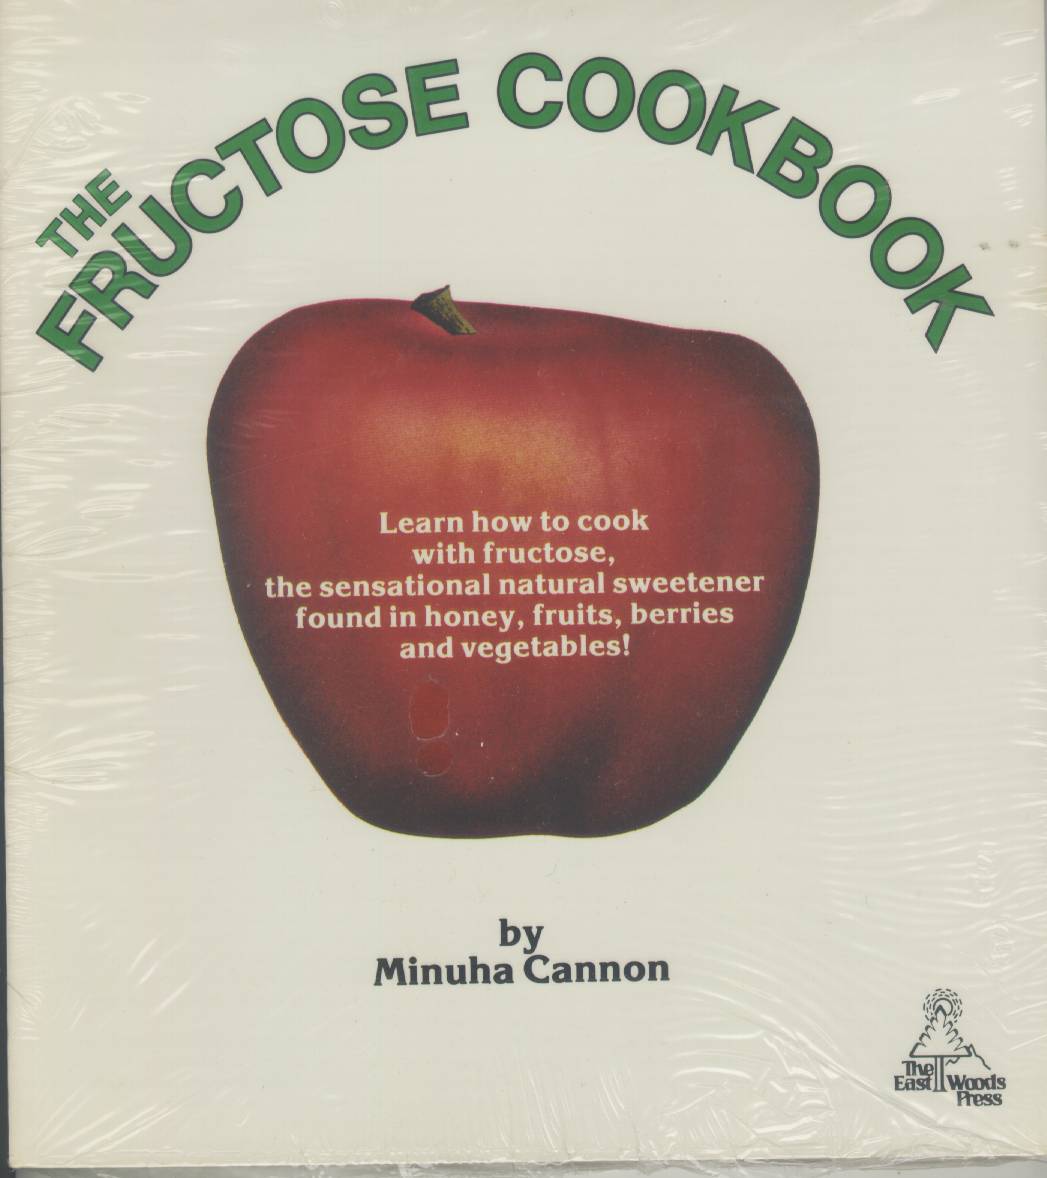 THE FRUCTOSE COOKBOOK. 